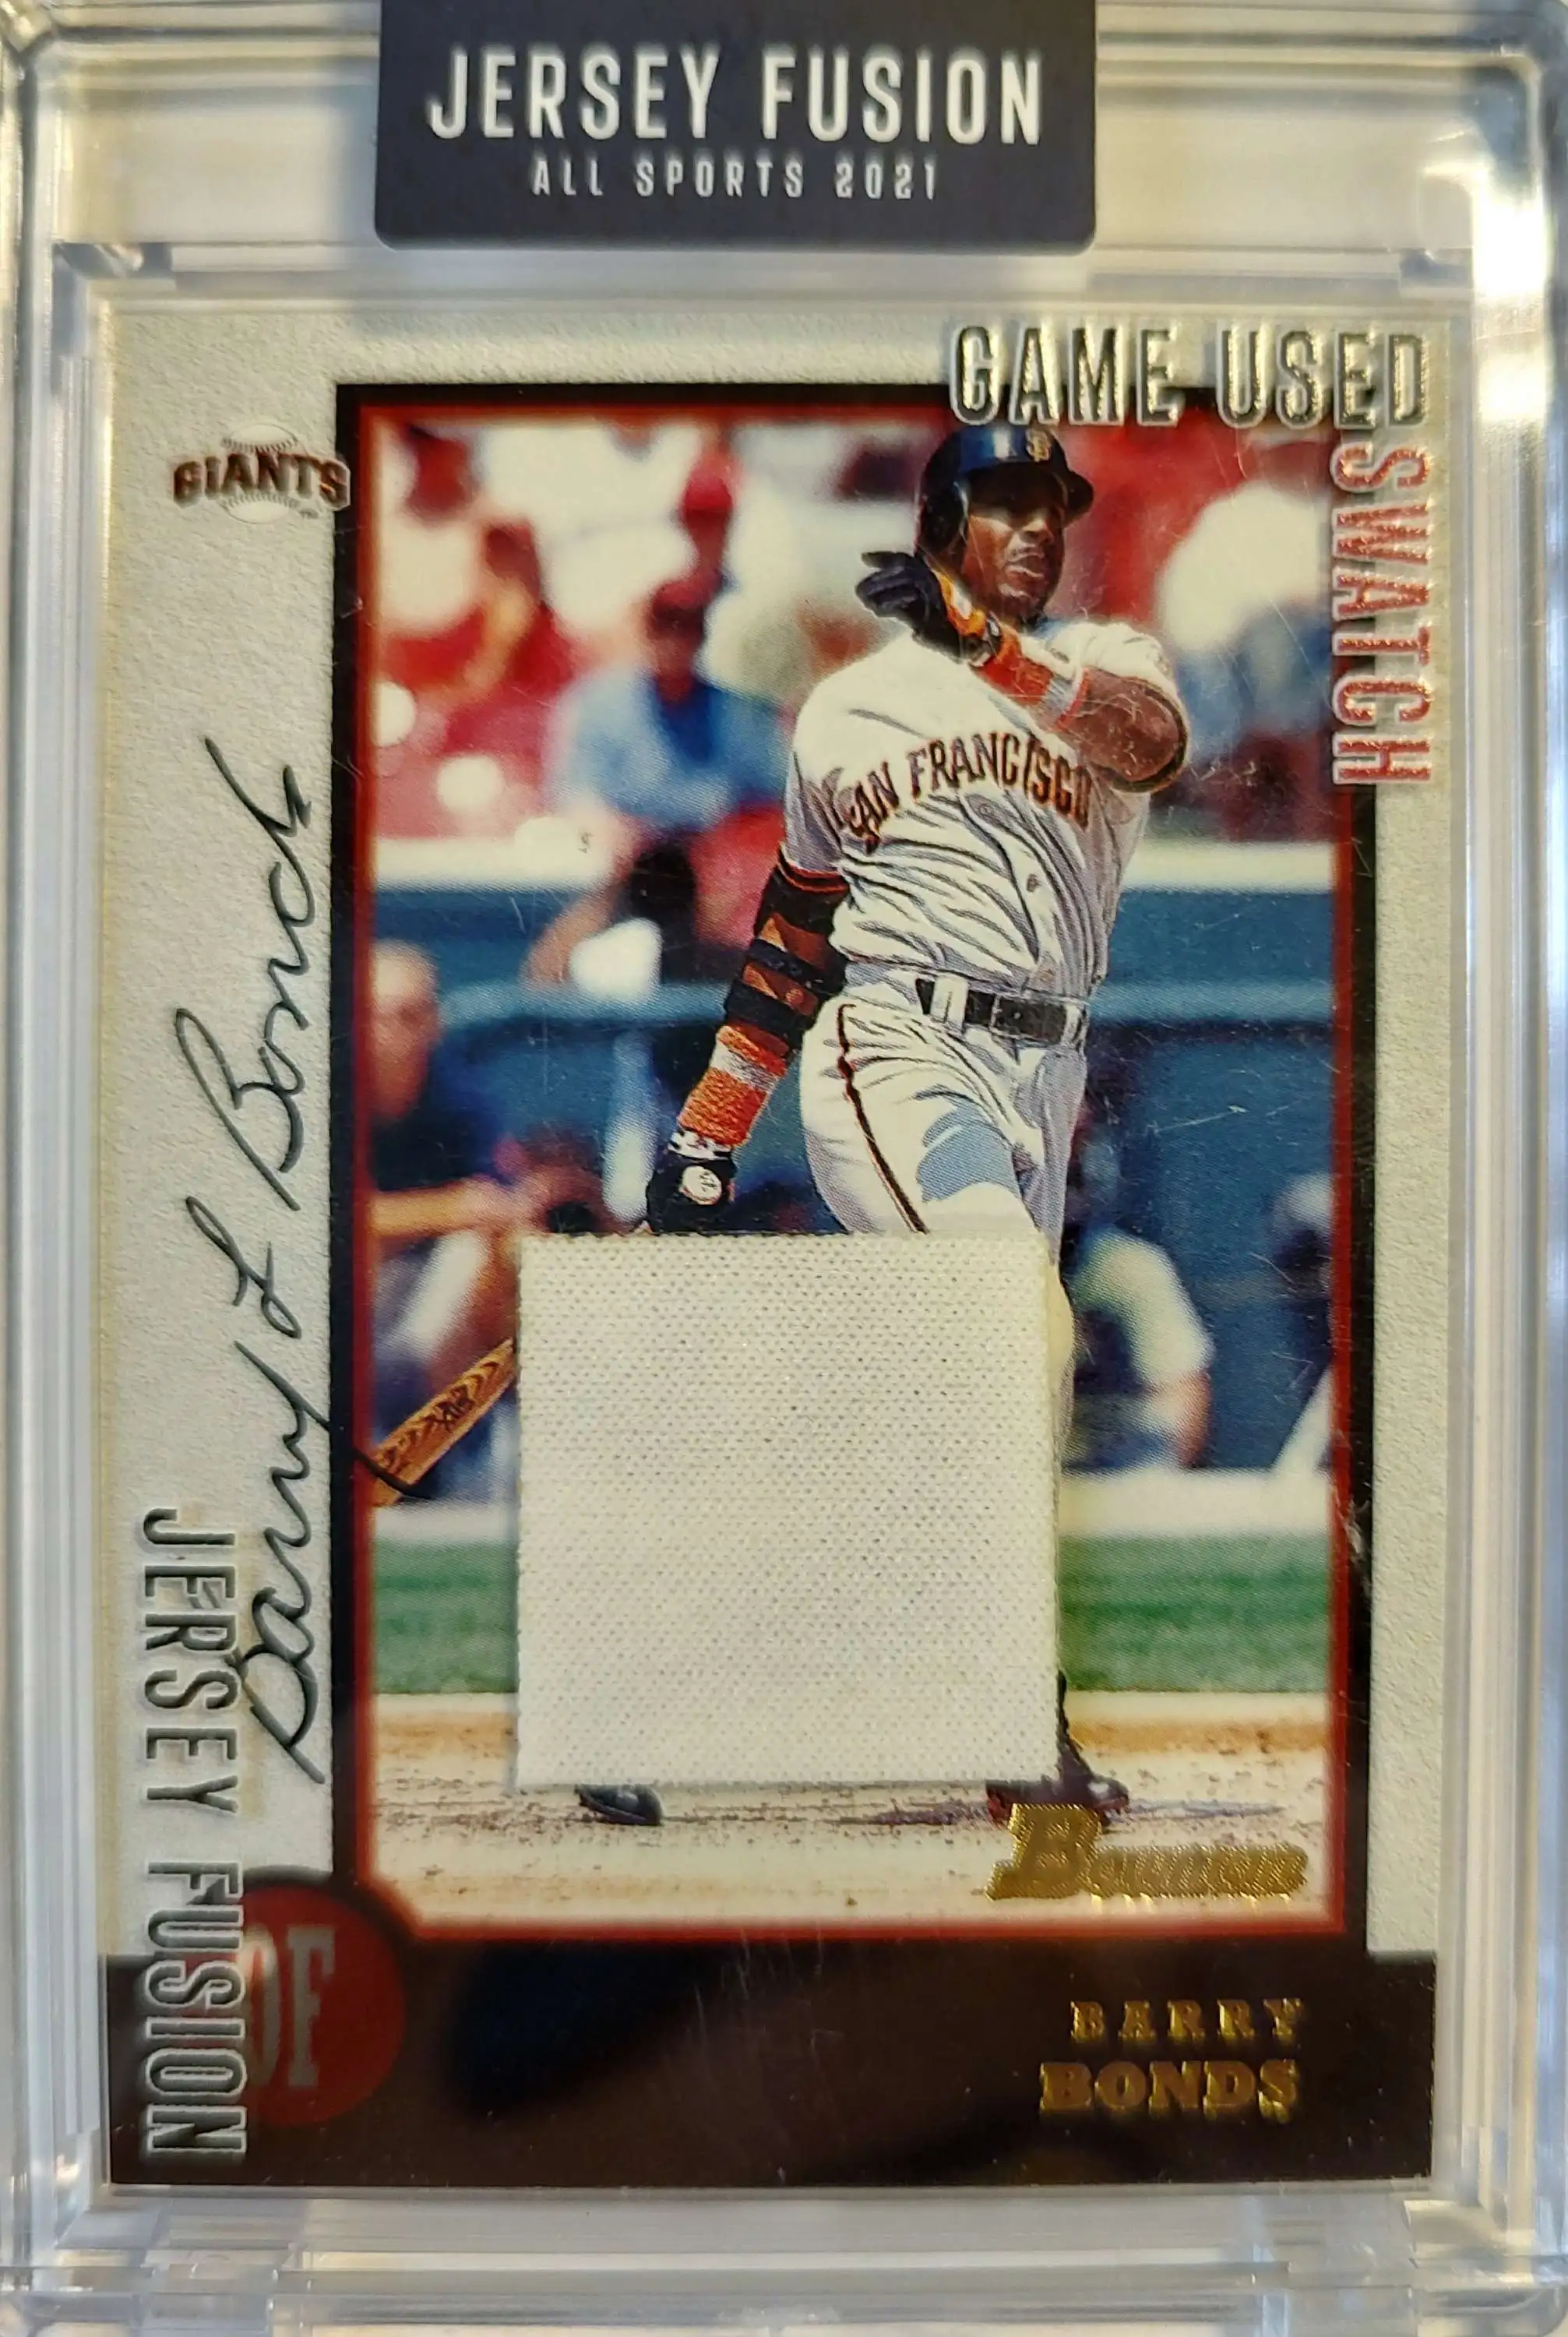 Jesey Fusion 2021 All Sports Edition Barry Bonds Trading Card JF